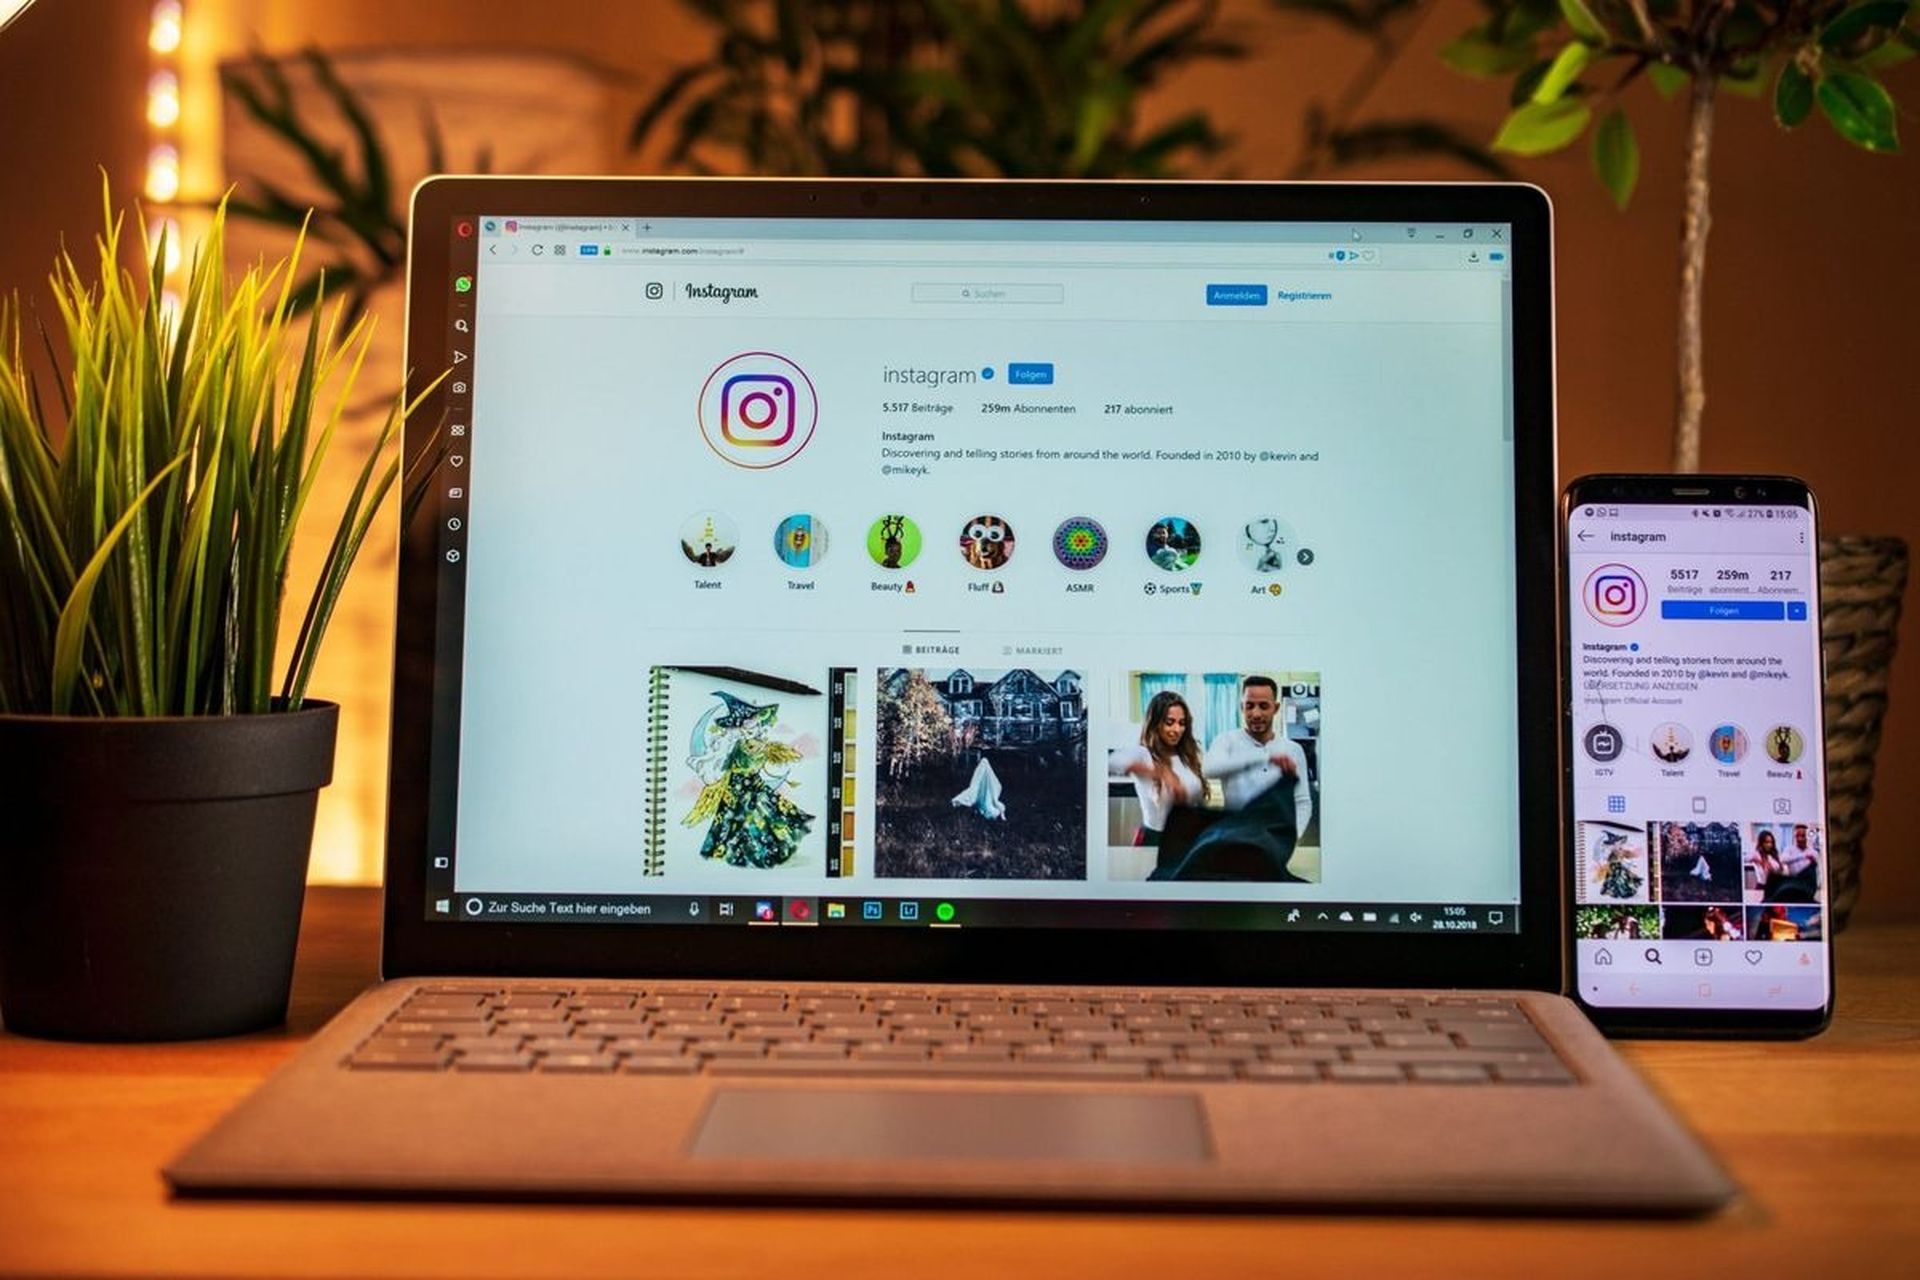 Many people ask, “How to find my Instagram URL?” and if you’re one of them, this article is for you.